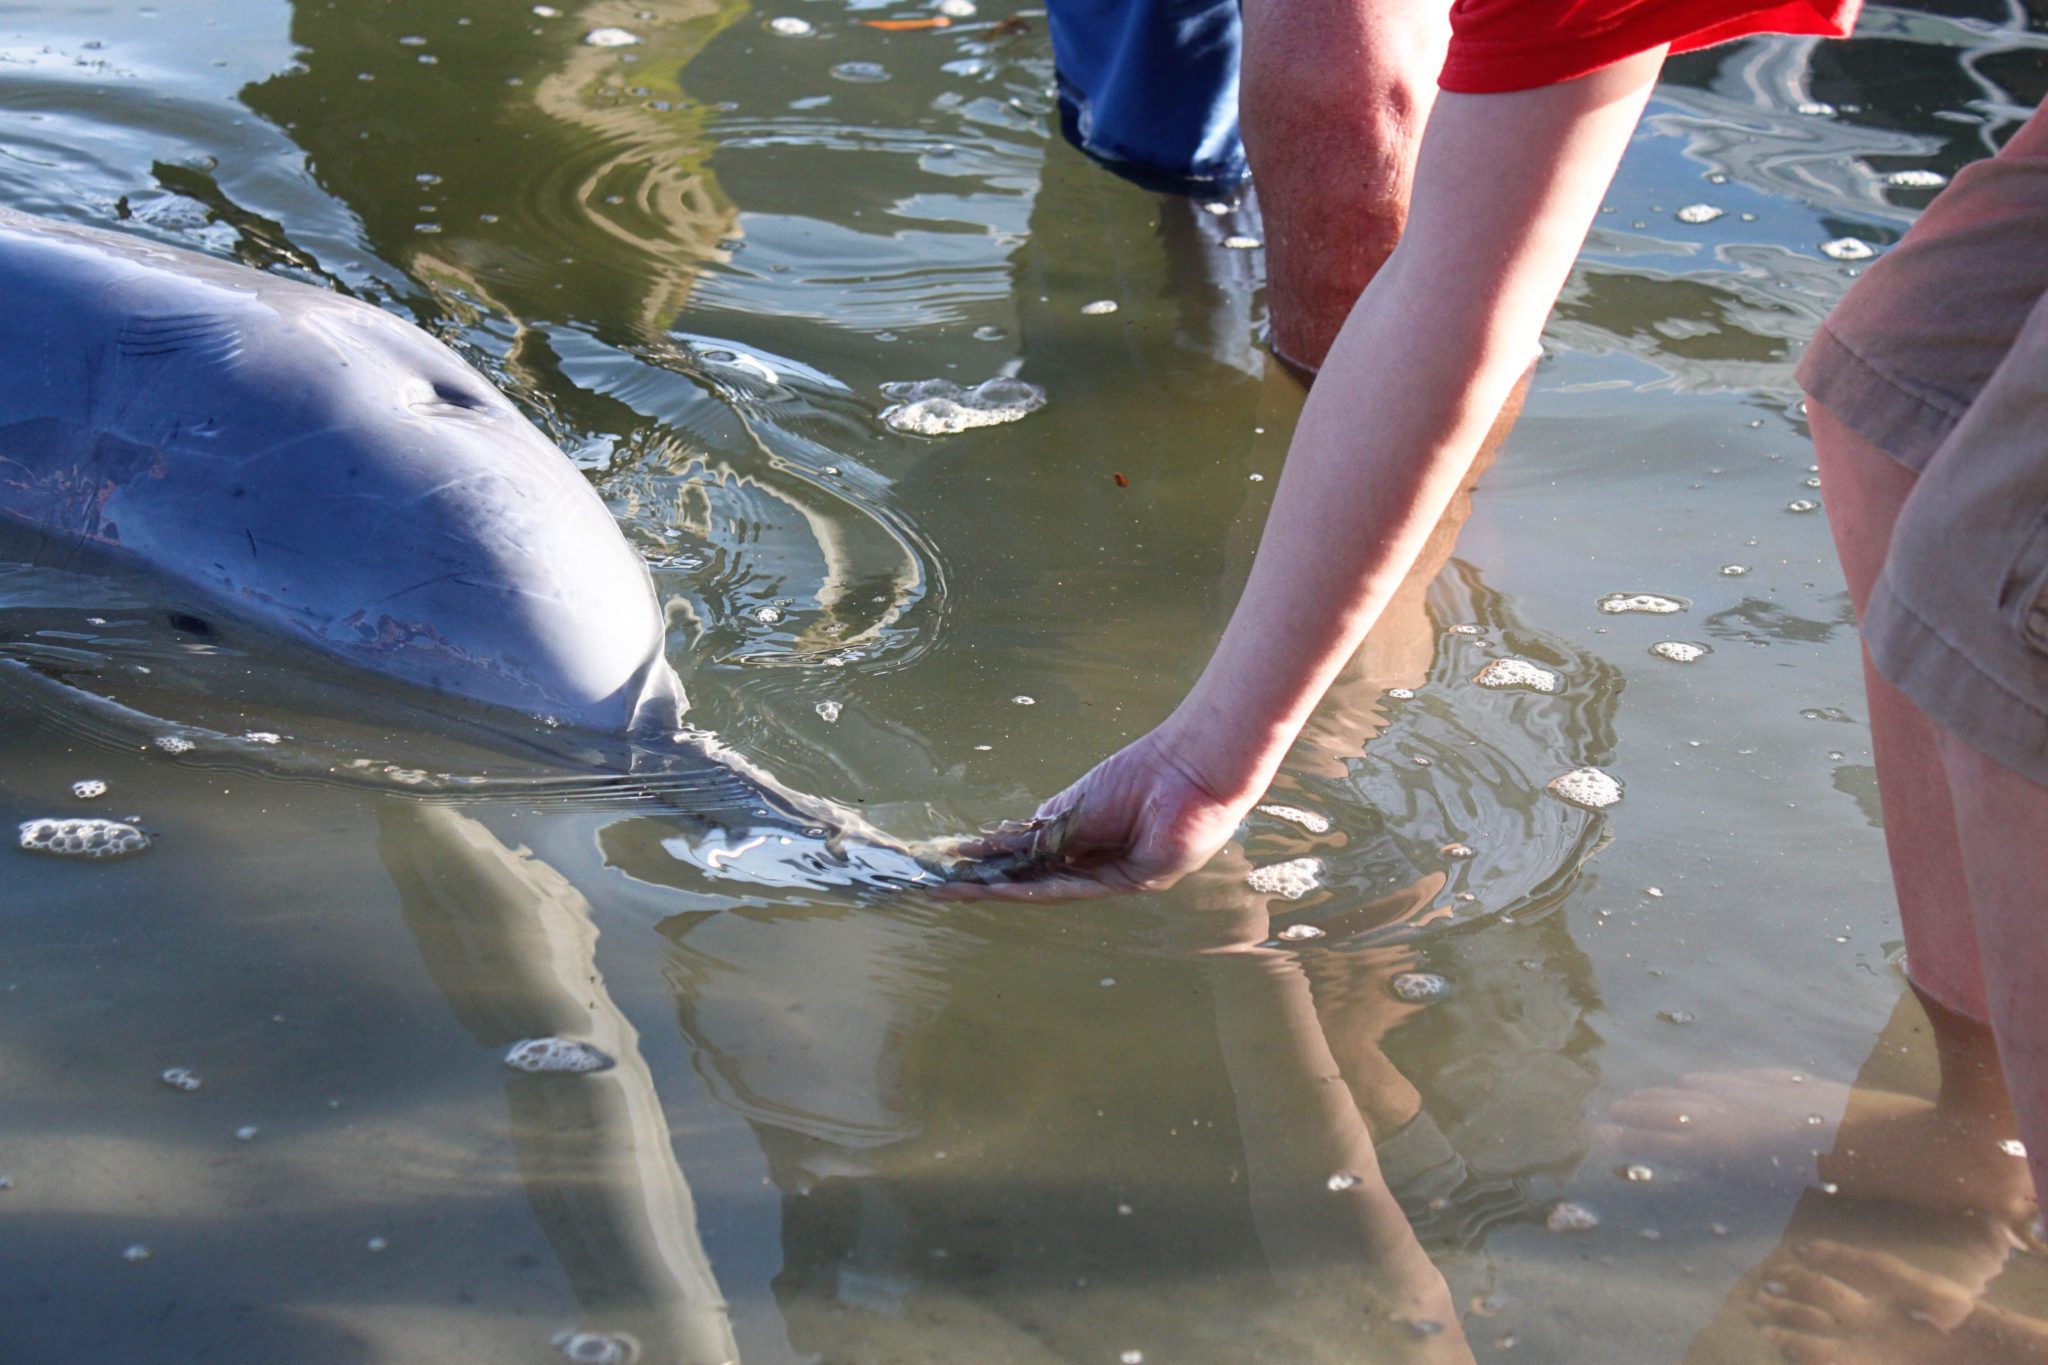 Hand feed dolphins in the wild at Tin Can Bay- 7 unforgettable things to do along Australia's Sunshine Coast #australia #sunshinecoast #tincanbay #simplywander